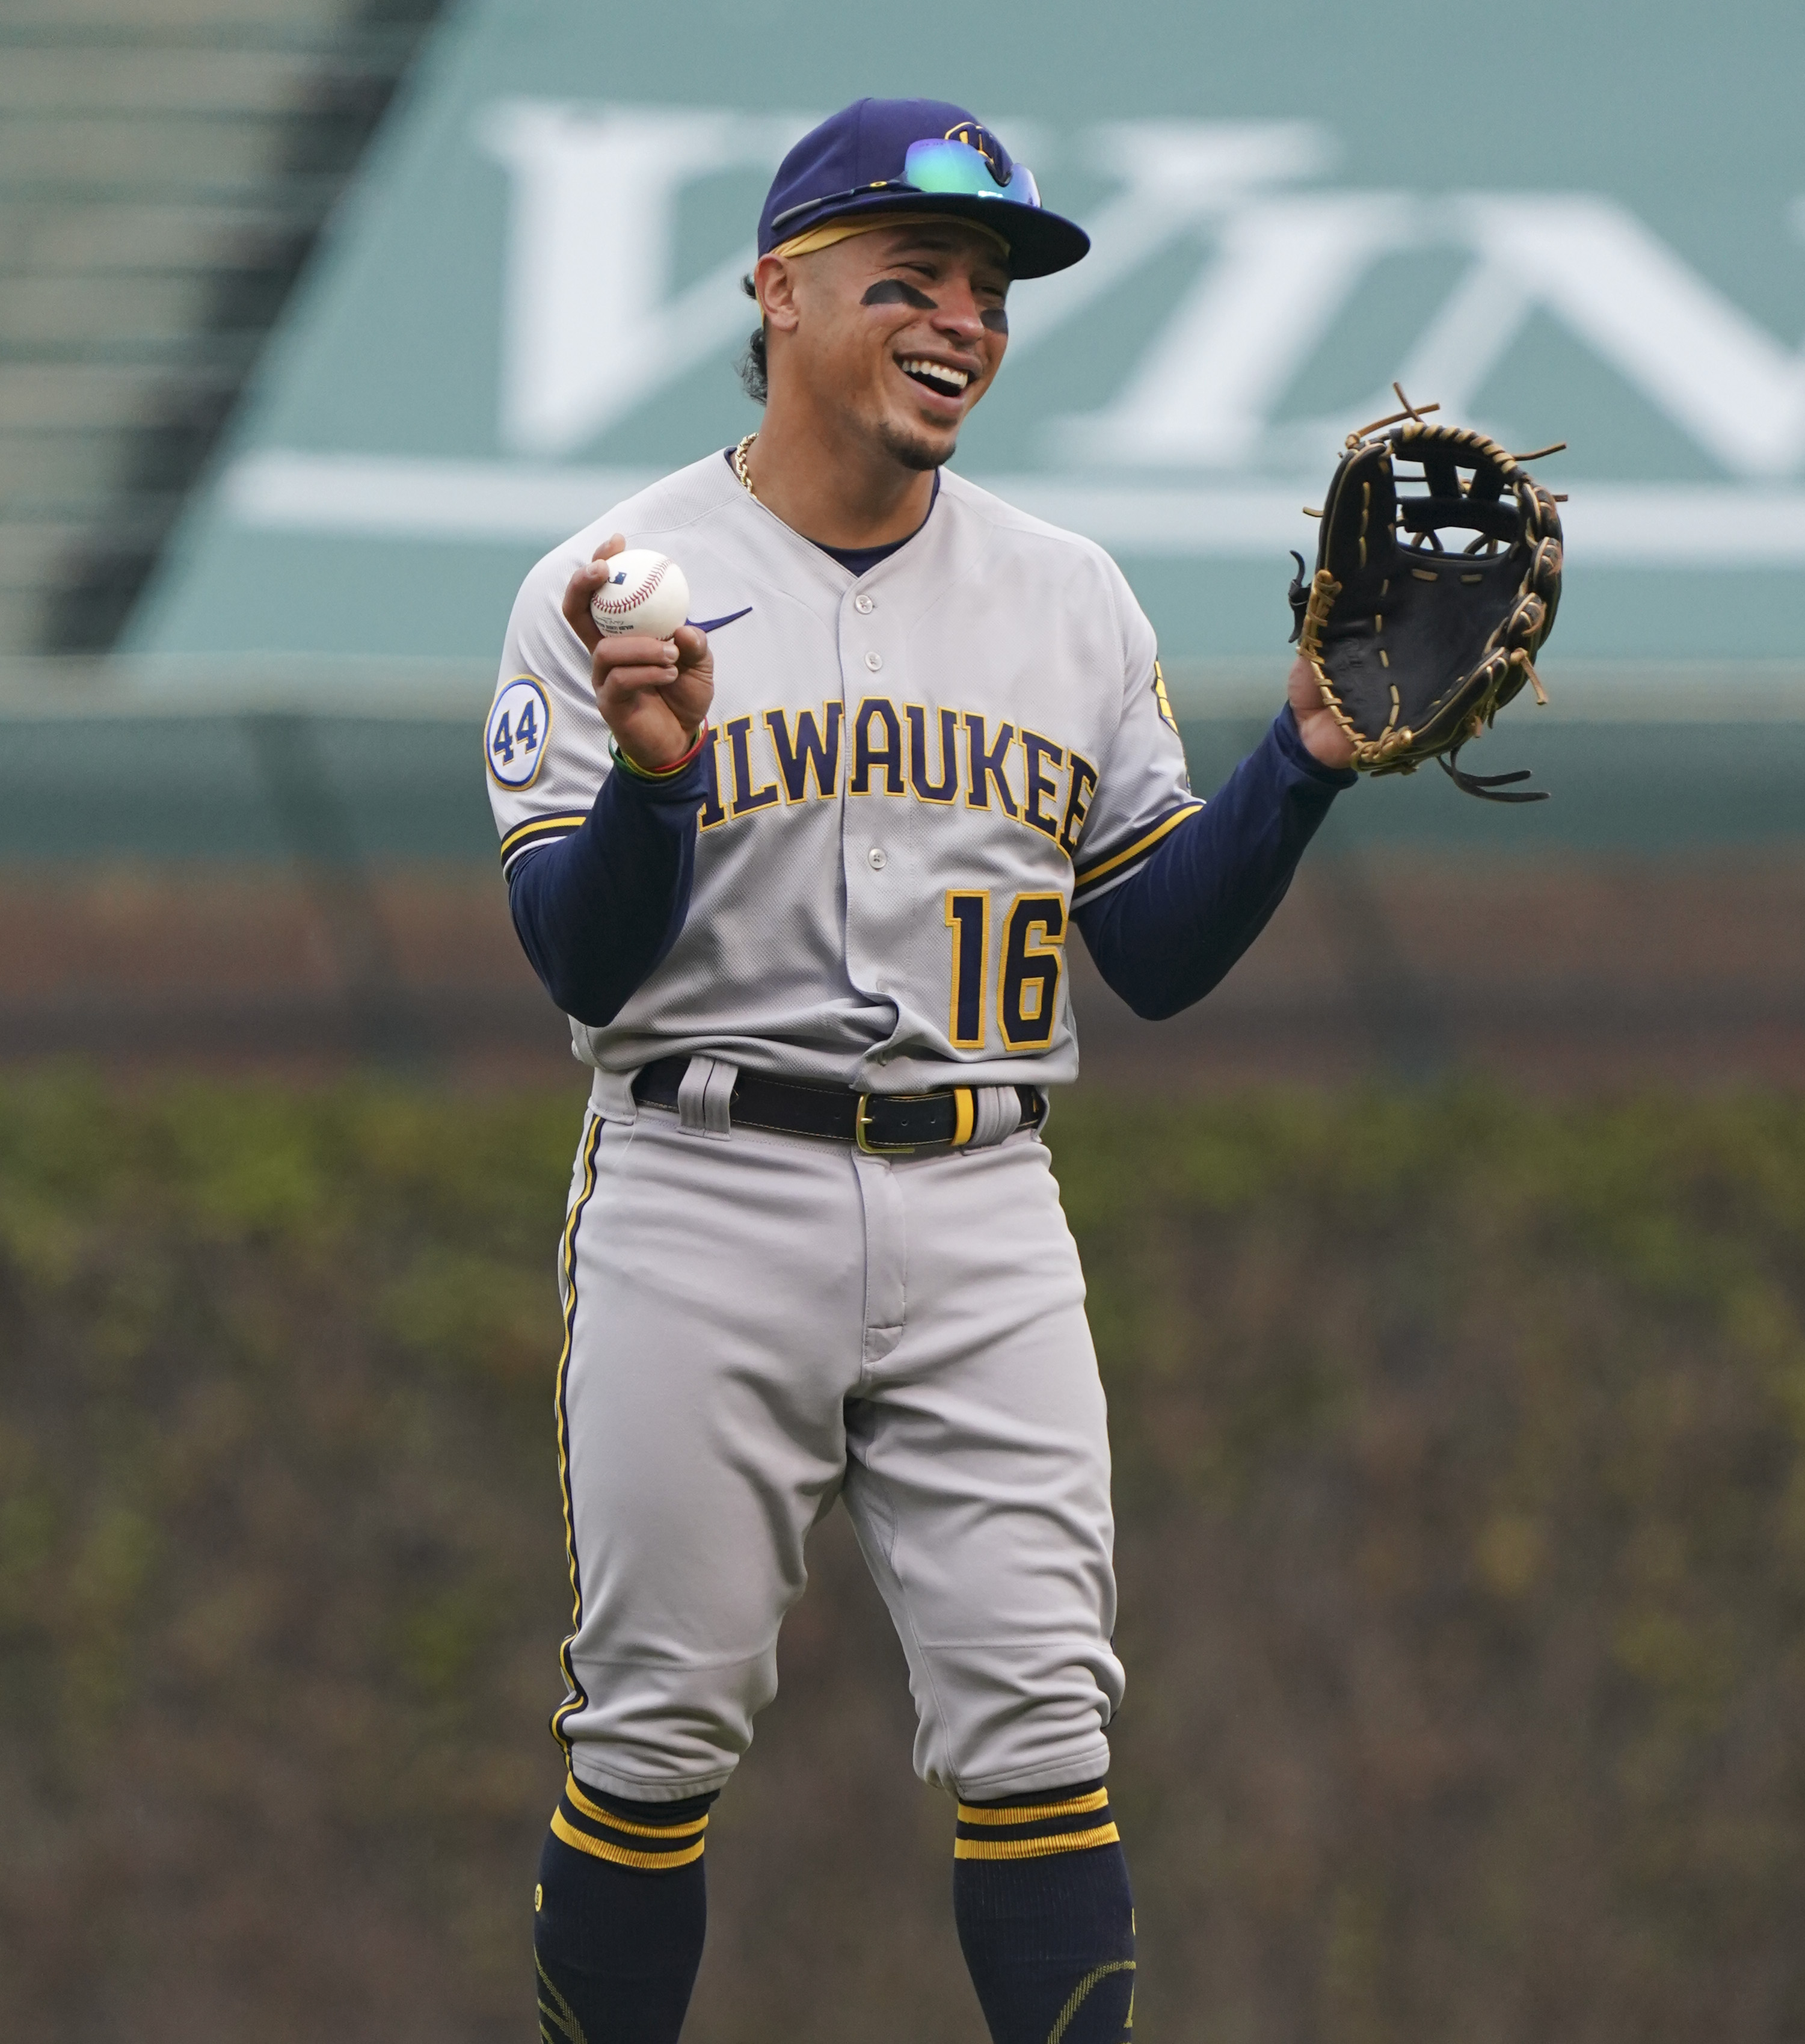 Tom on X: New #Brewers home alternate uniform is nod to previous